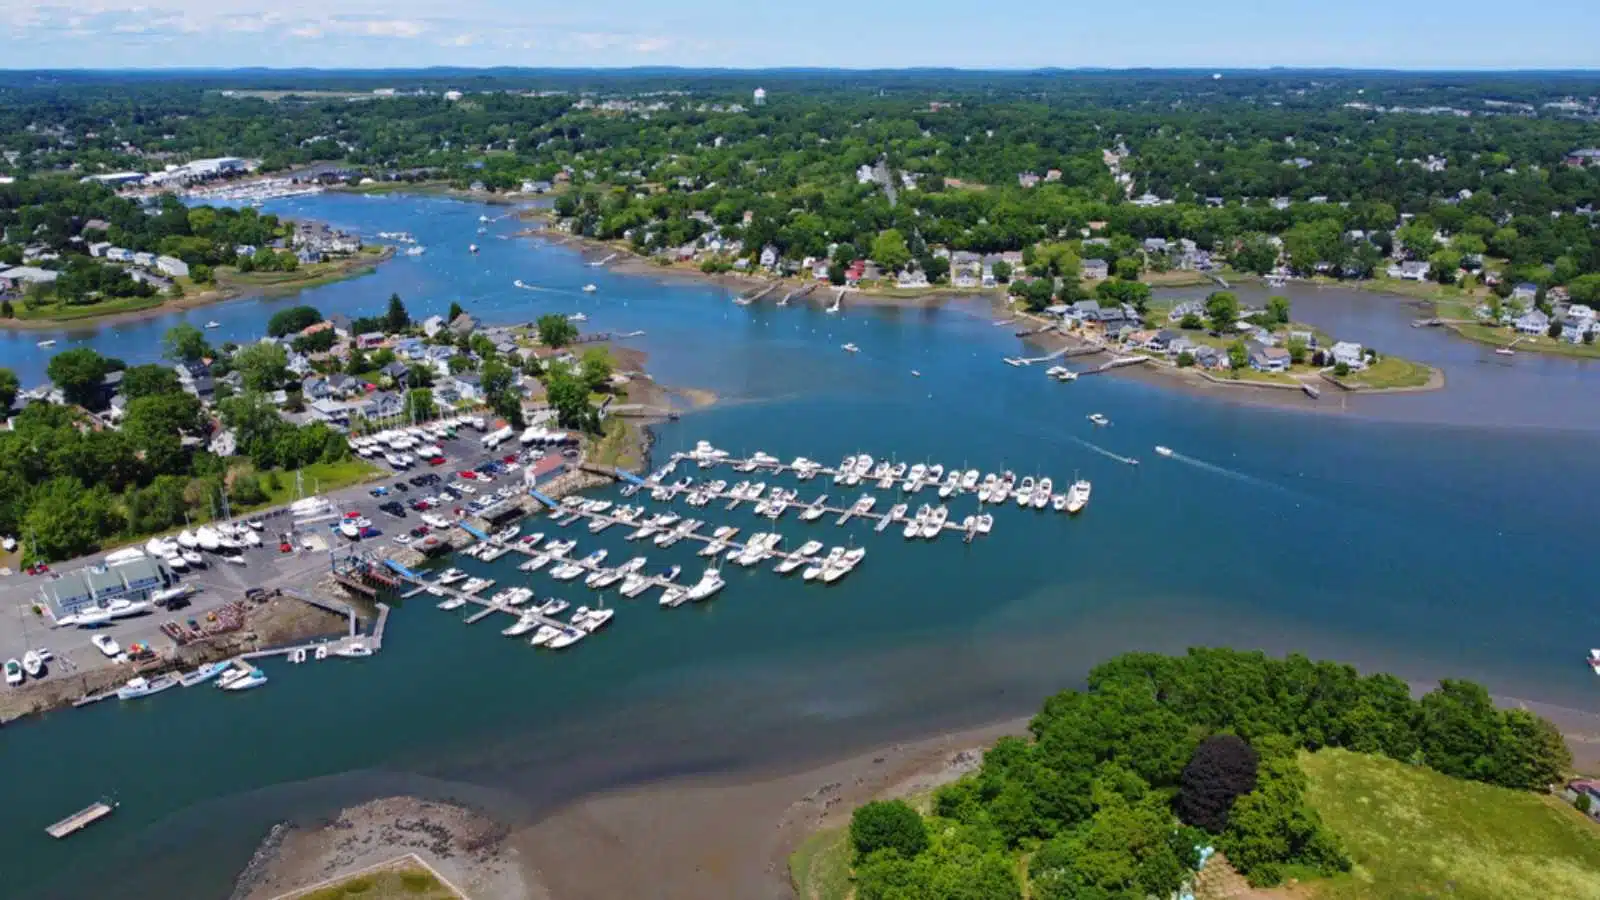 Danvers Liberty Marina aerial view at 130 Water Street at Crane River and Waters River in city of Danvers, Massachusetts MA, USA.